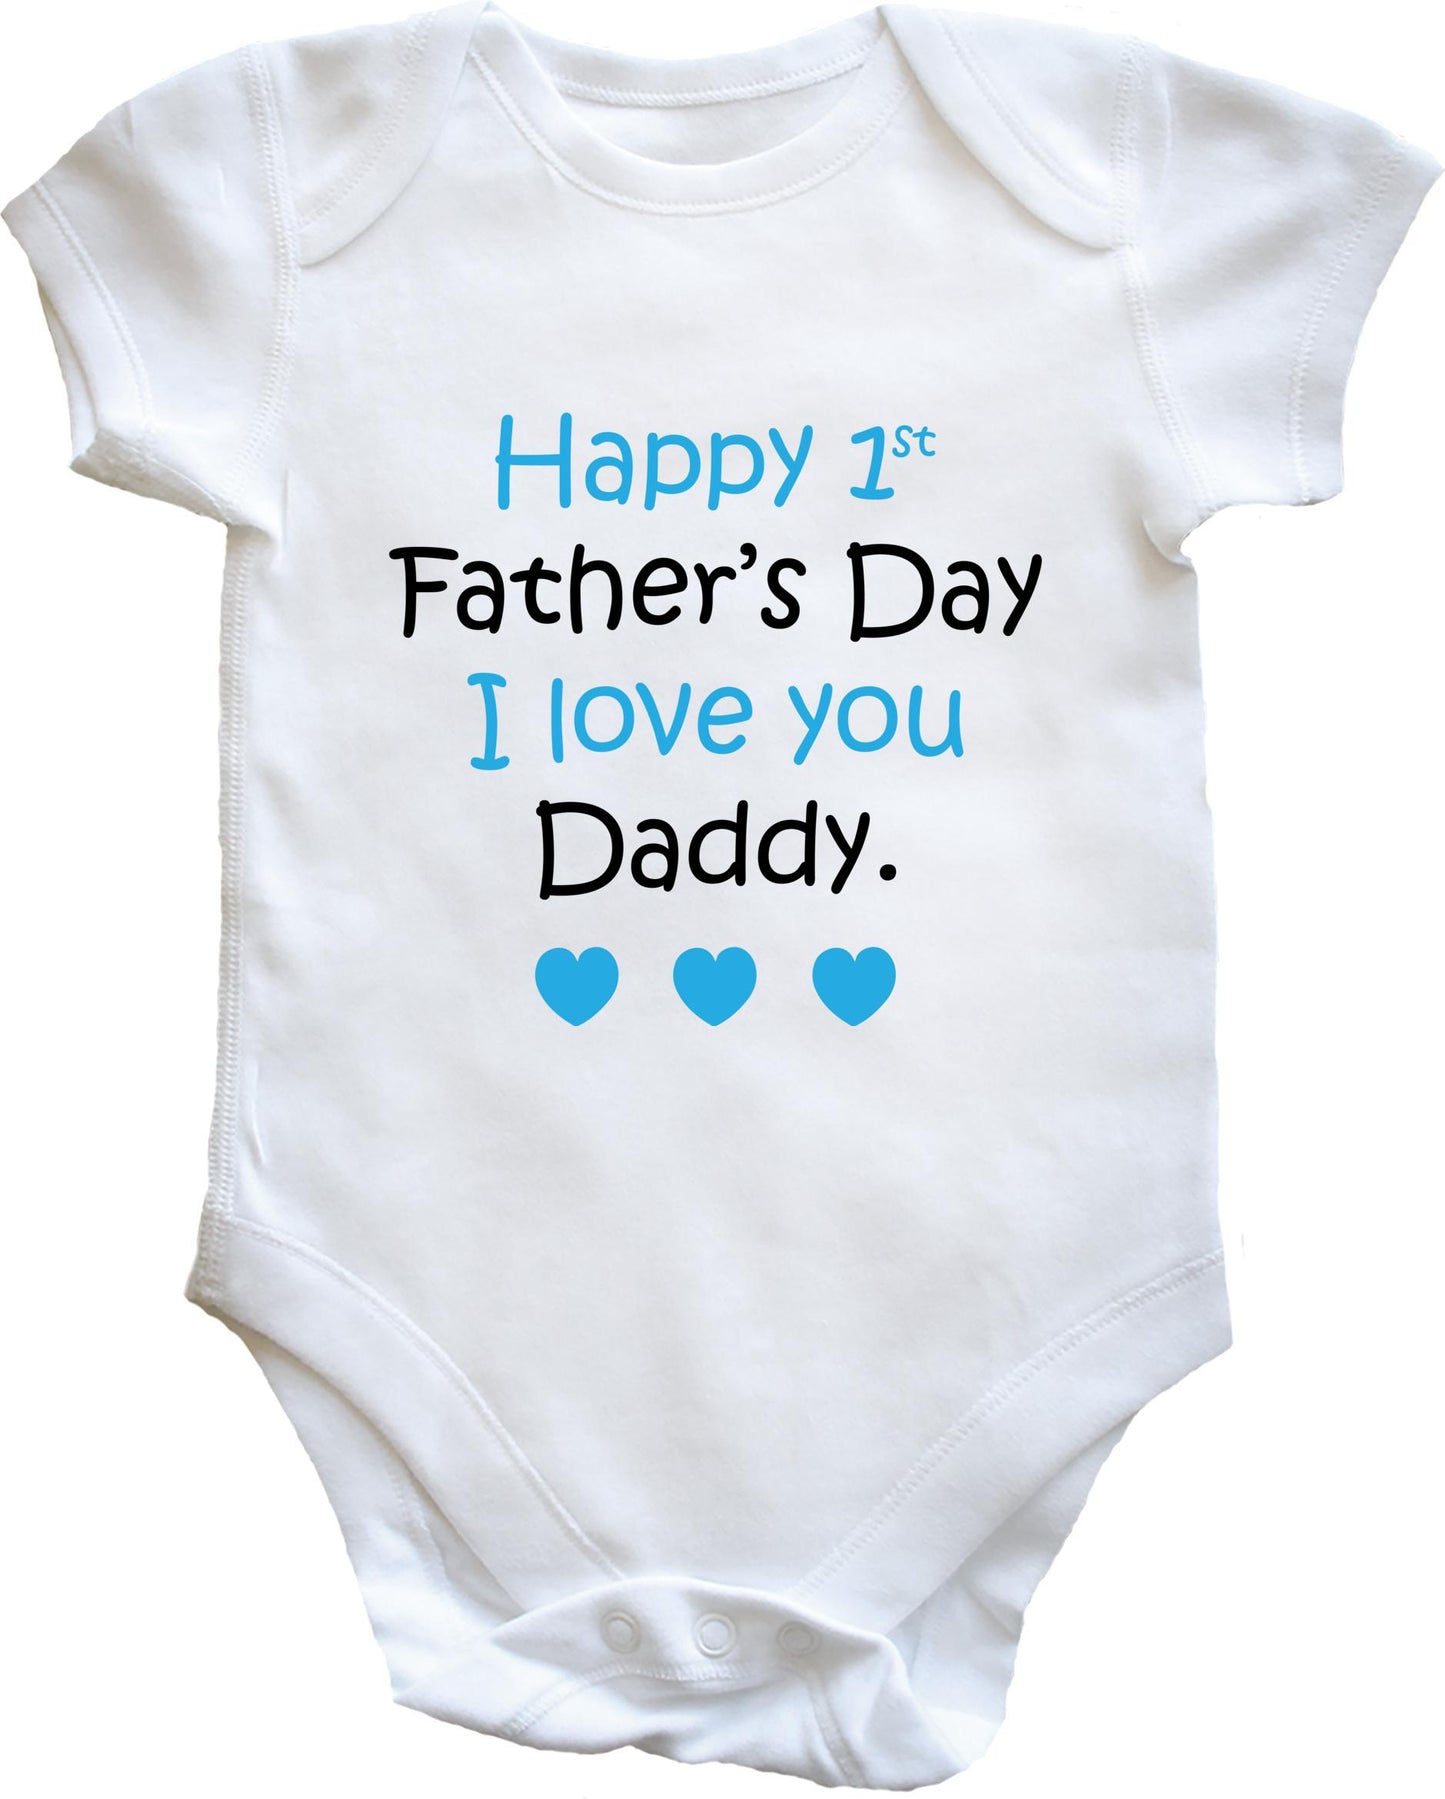 Happy 1st Father's Day (Blue) baby vest